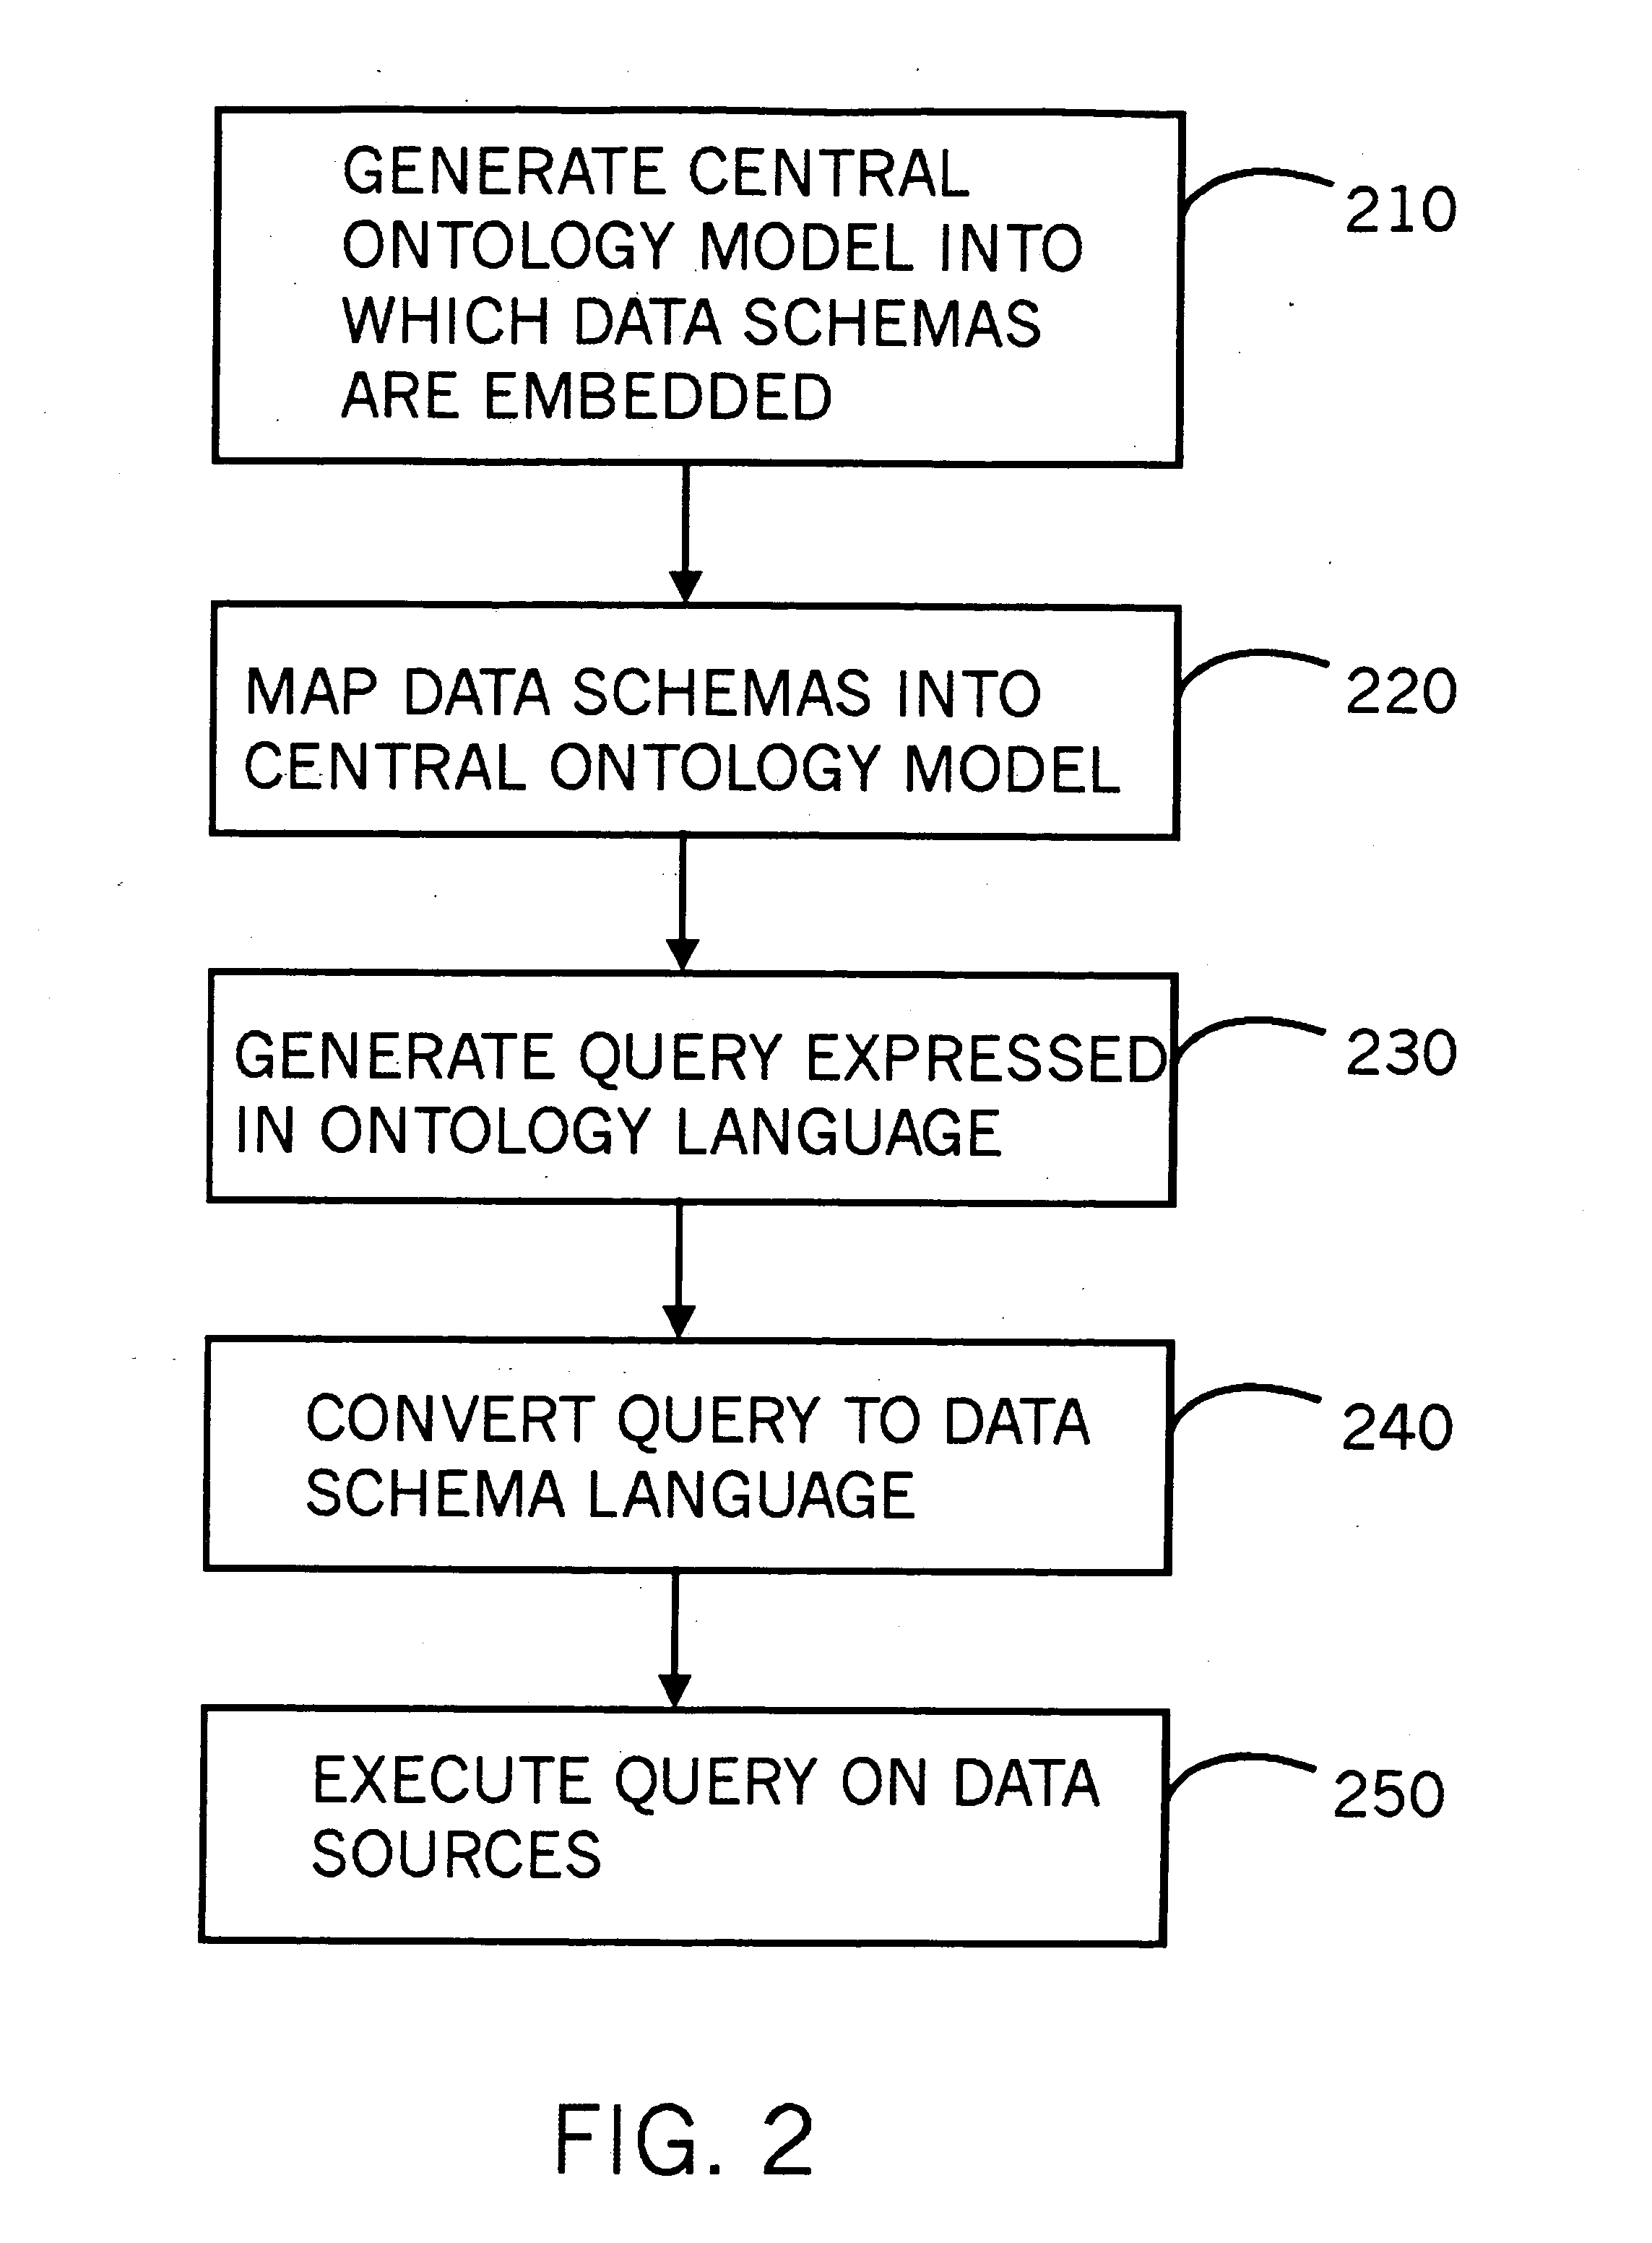 Data query and location through a central ontology model